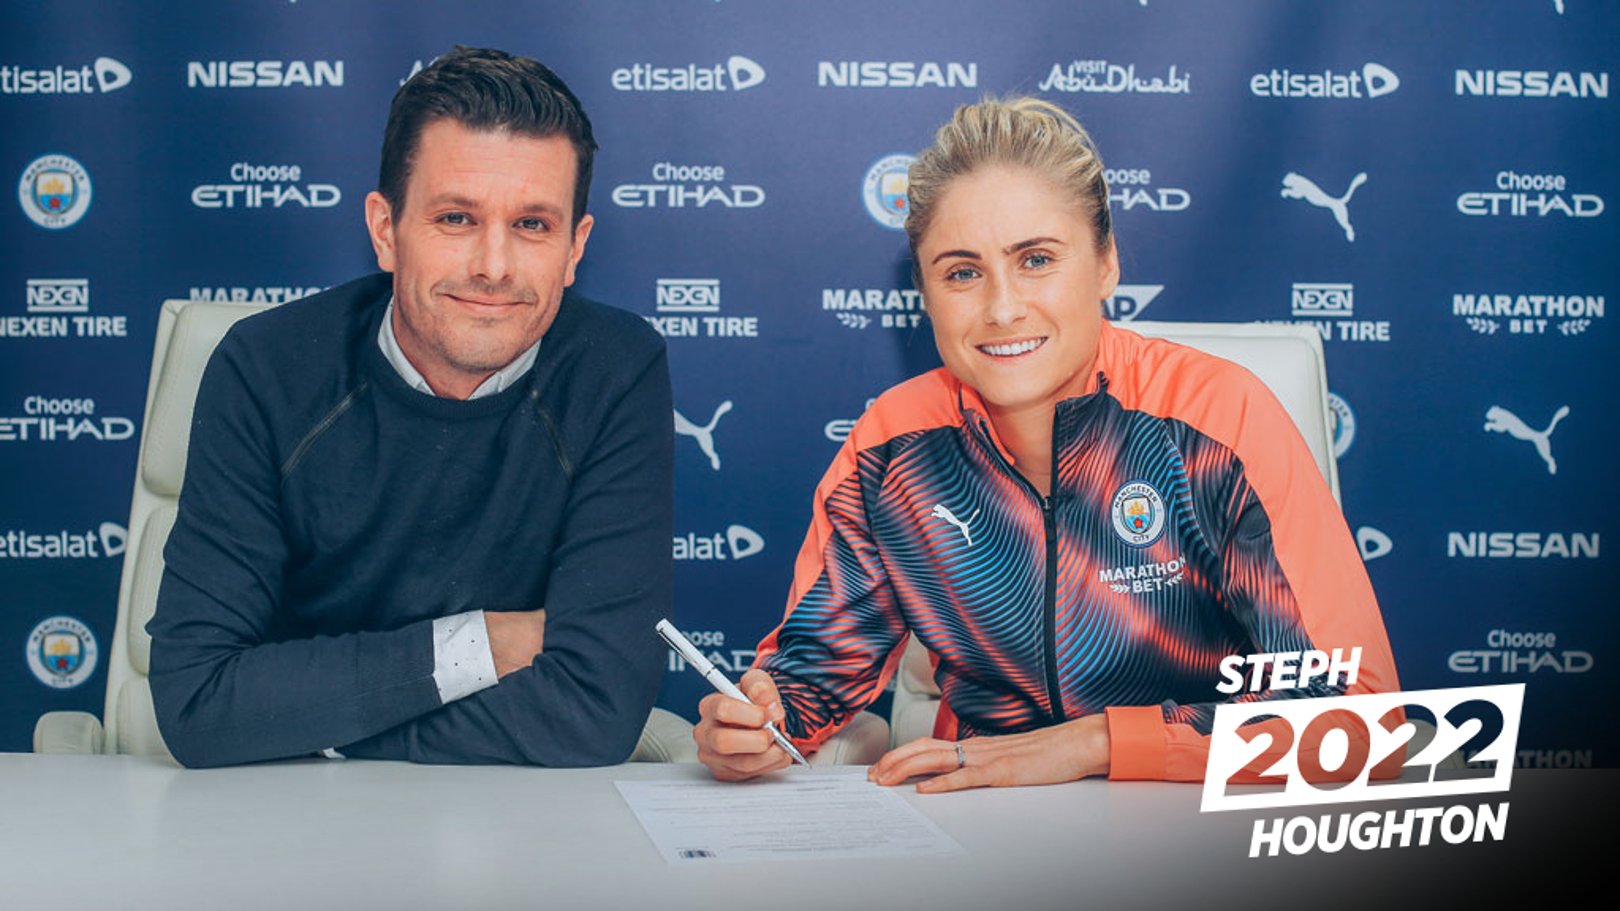 Steph Houghton pens new contract